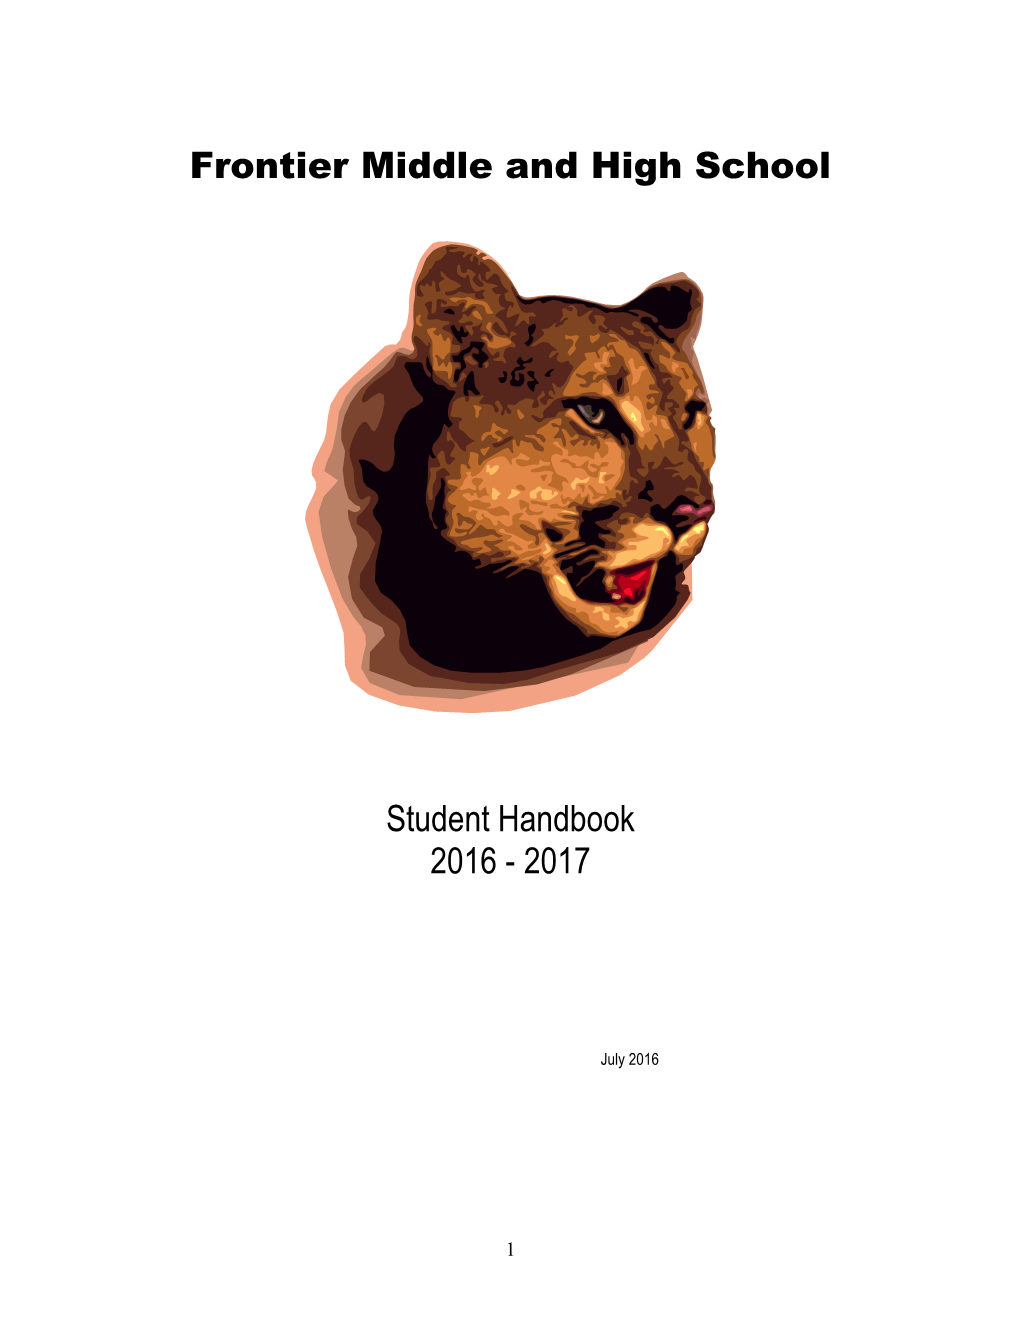 Frontier Middle and High School Student Handbook 2016